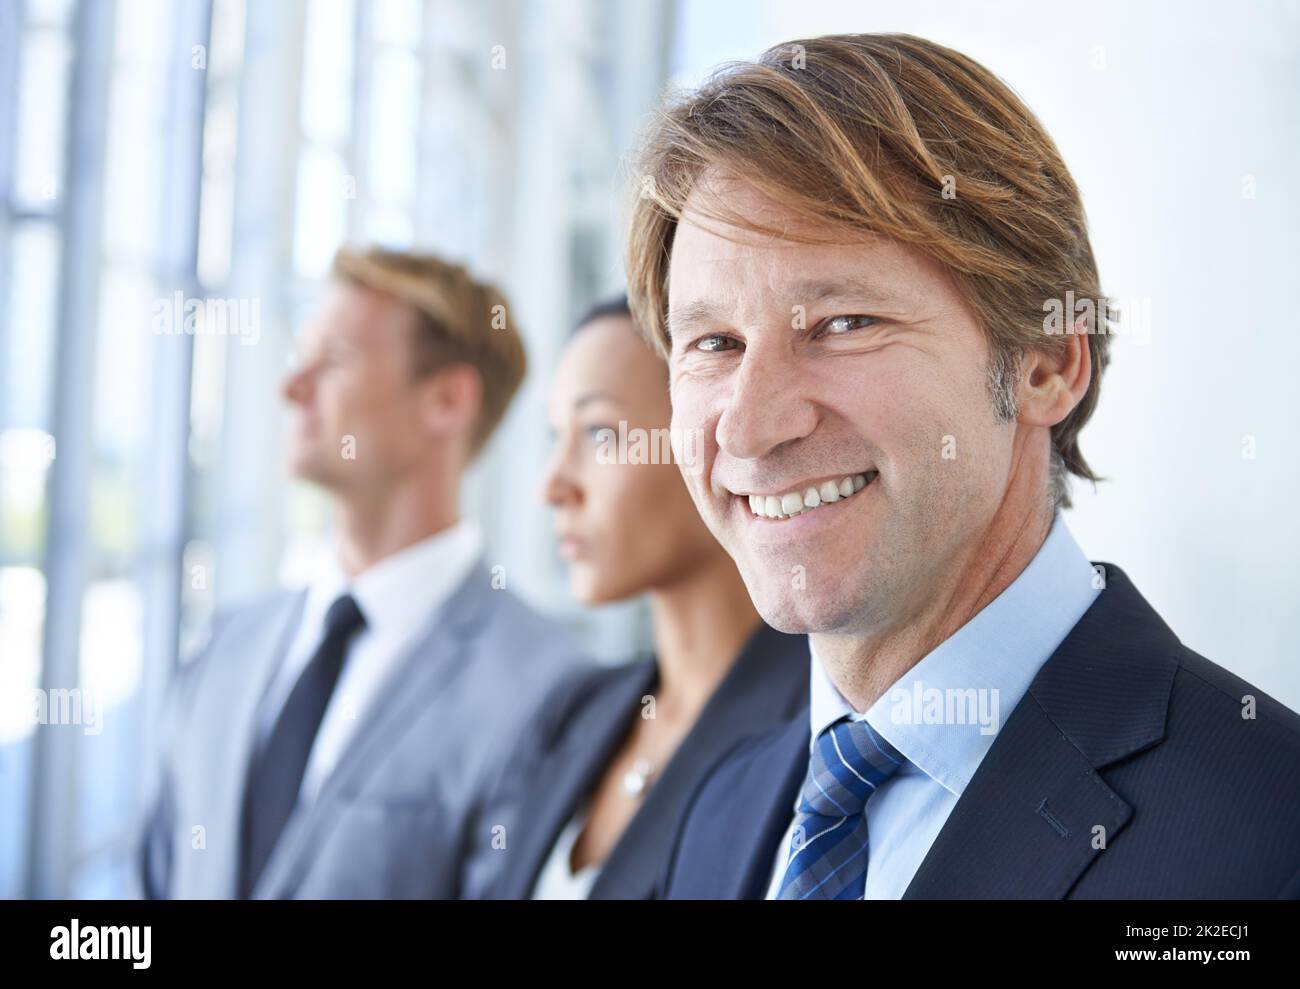 One day Ill be on Fortune 500s top 50. A smiling businessman with two coworkers behind him. Stock Photo